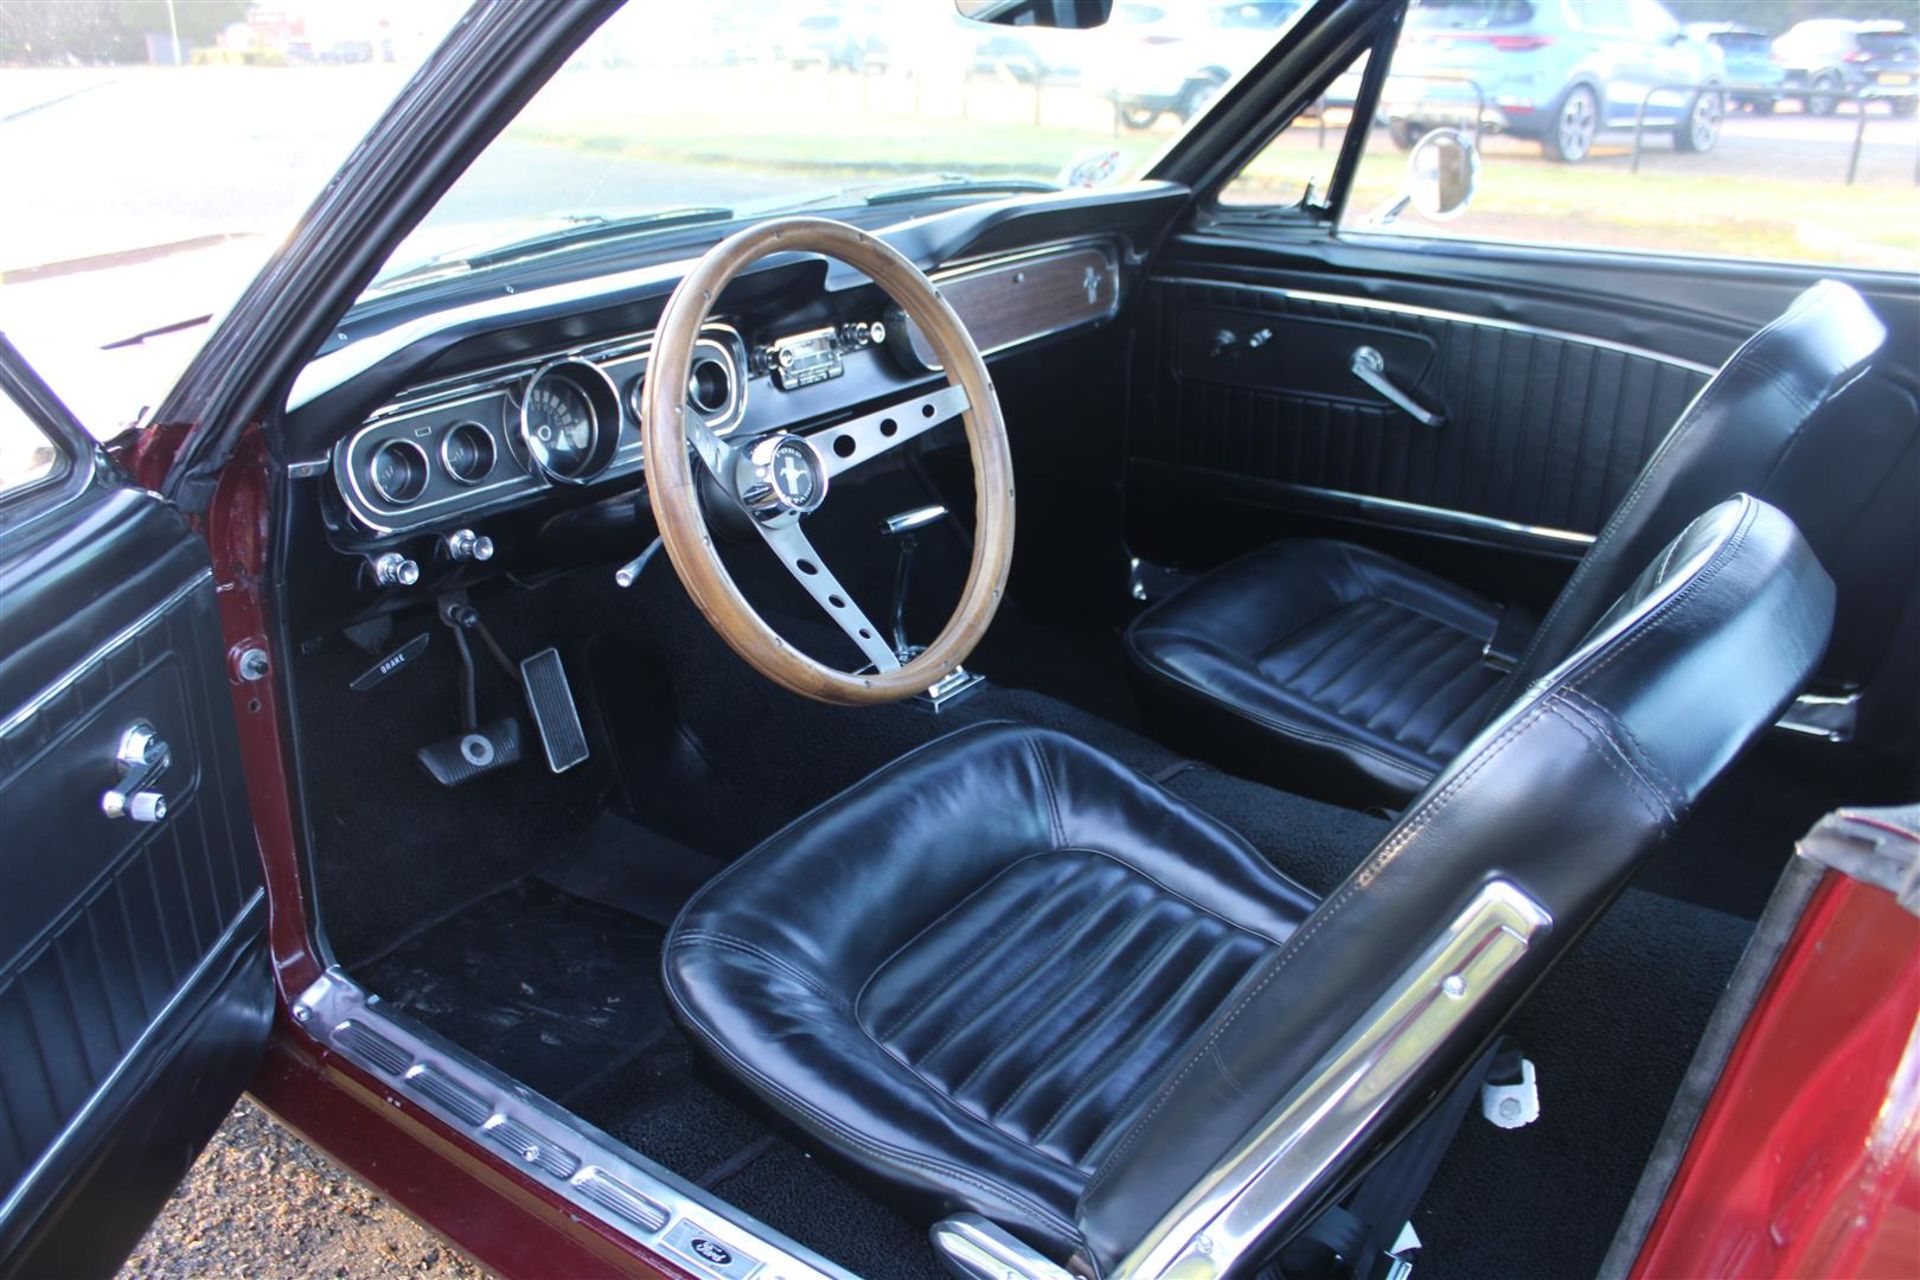 1965 Ford Mustang 5.0 V8 Fastback Auto LHD - Image 12 of 21